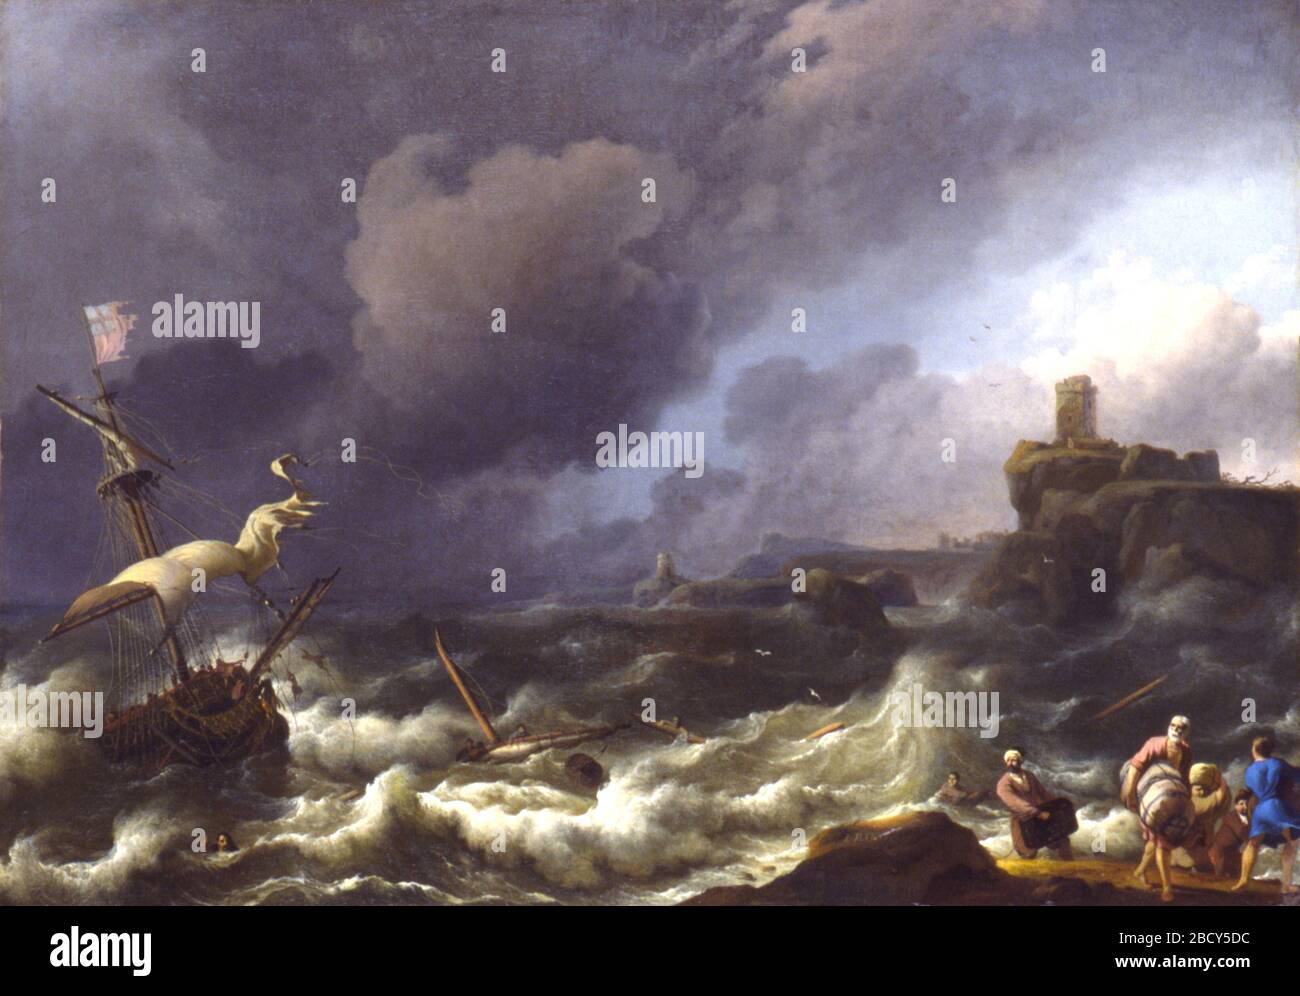 The Storm. A rich but risky trade on the high seas brought a golden age to Holland in the seventeenth century. This painting shows the hazards that awaited Dutch ships, which ventured as far as Southeast Asia. Stock Photo